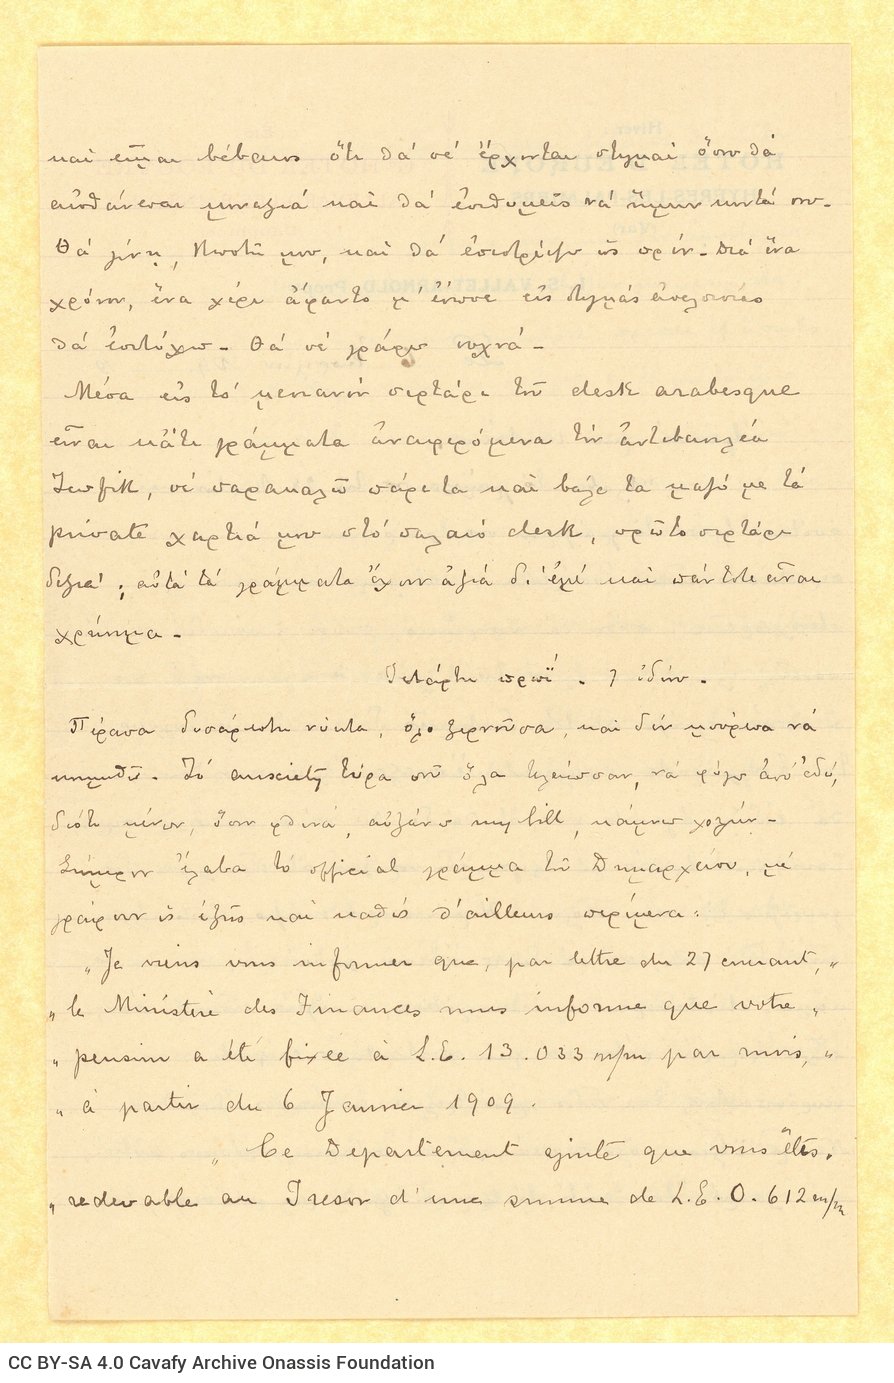 Handwritten diary-type letter by Paul Cavafy to C. P. Cavafy from Hyères, France. The text of the letter is written in two s